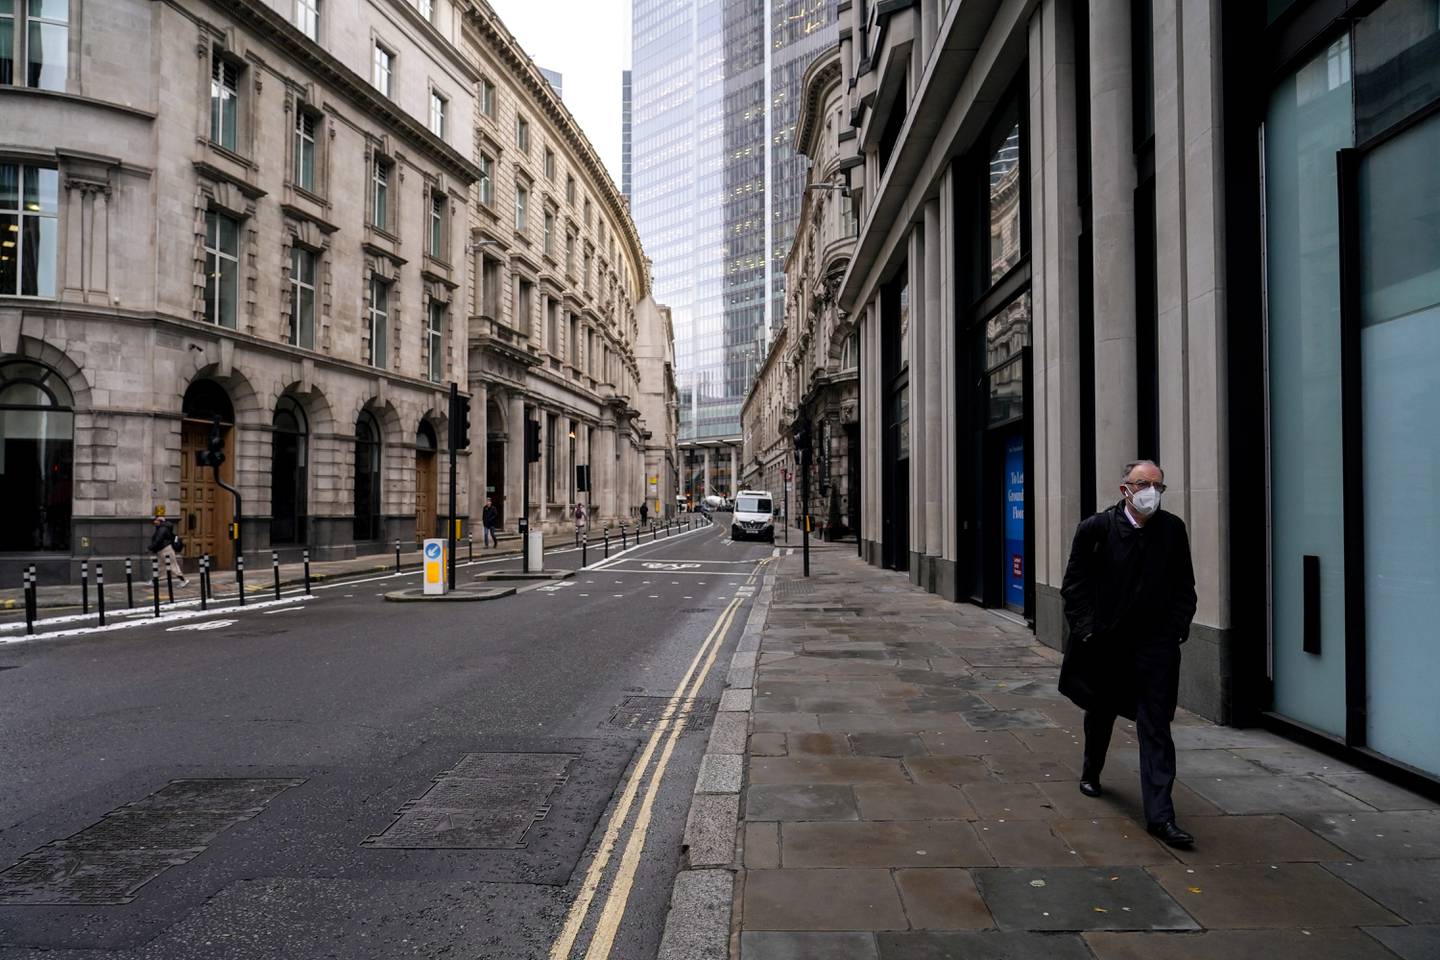 A man wears a face mask while walking in an empty street in the London's financial district, known as The City, as new work from home guidance came into effect. AP.